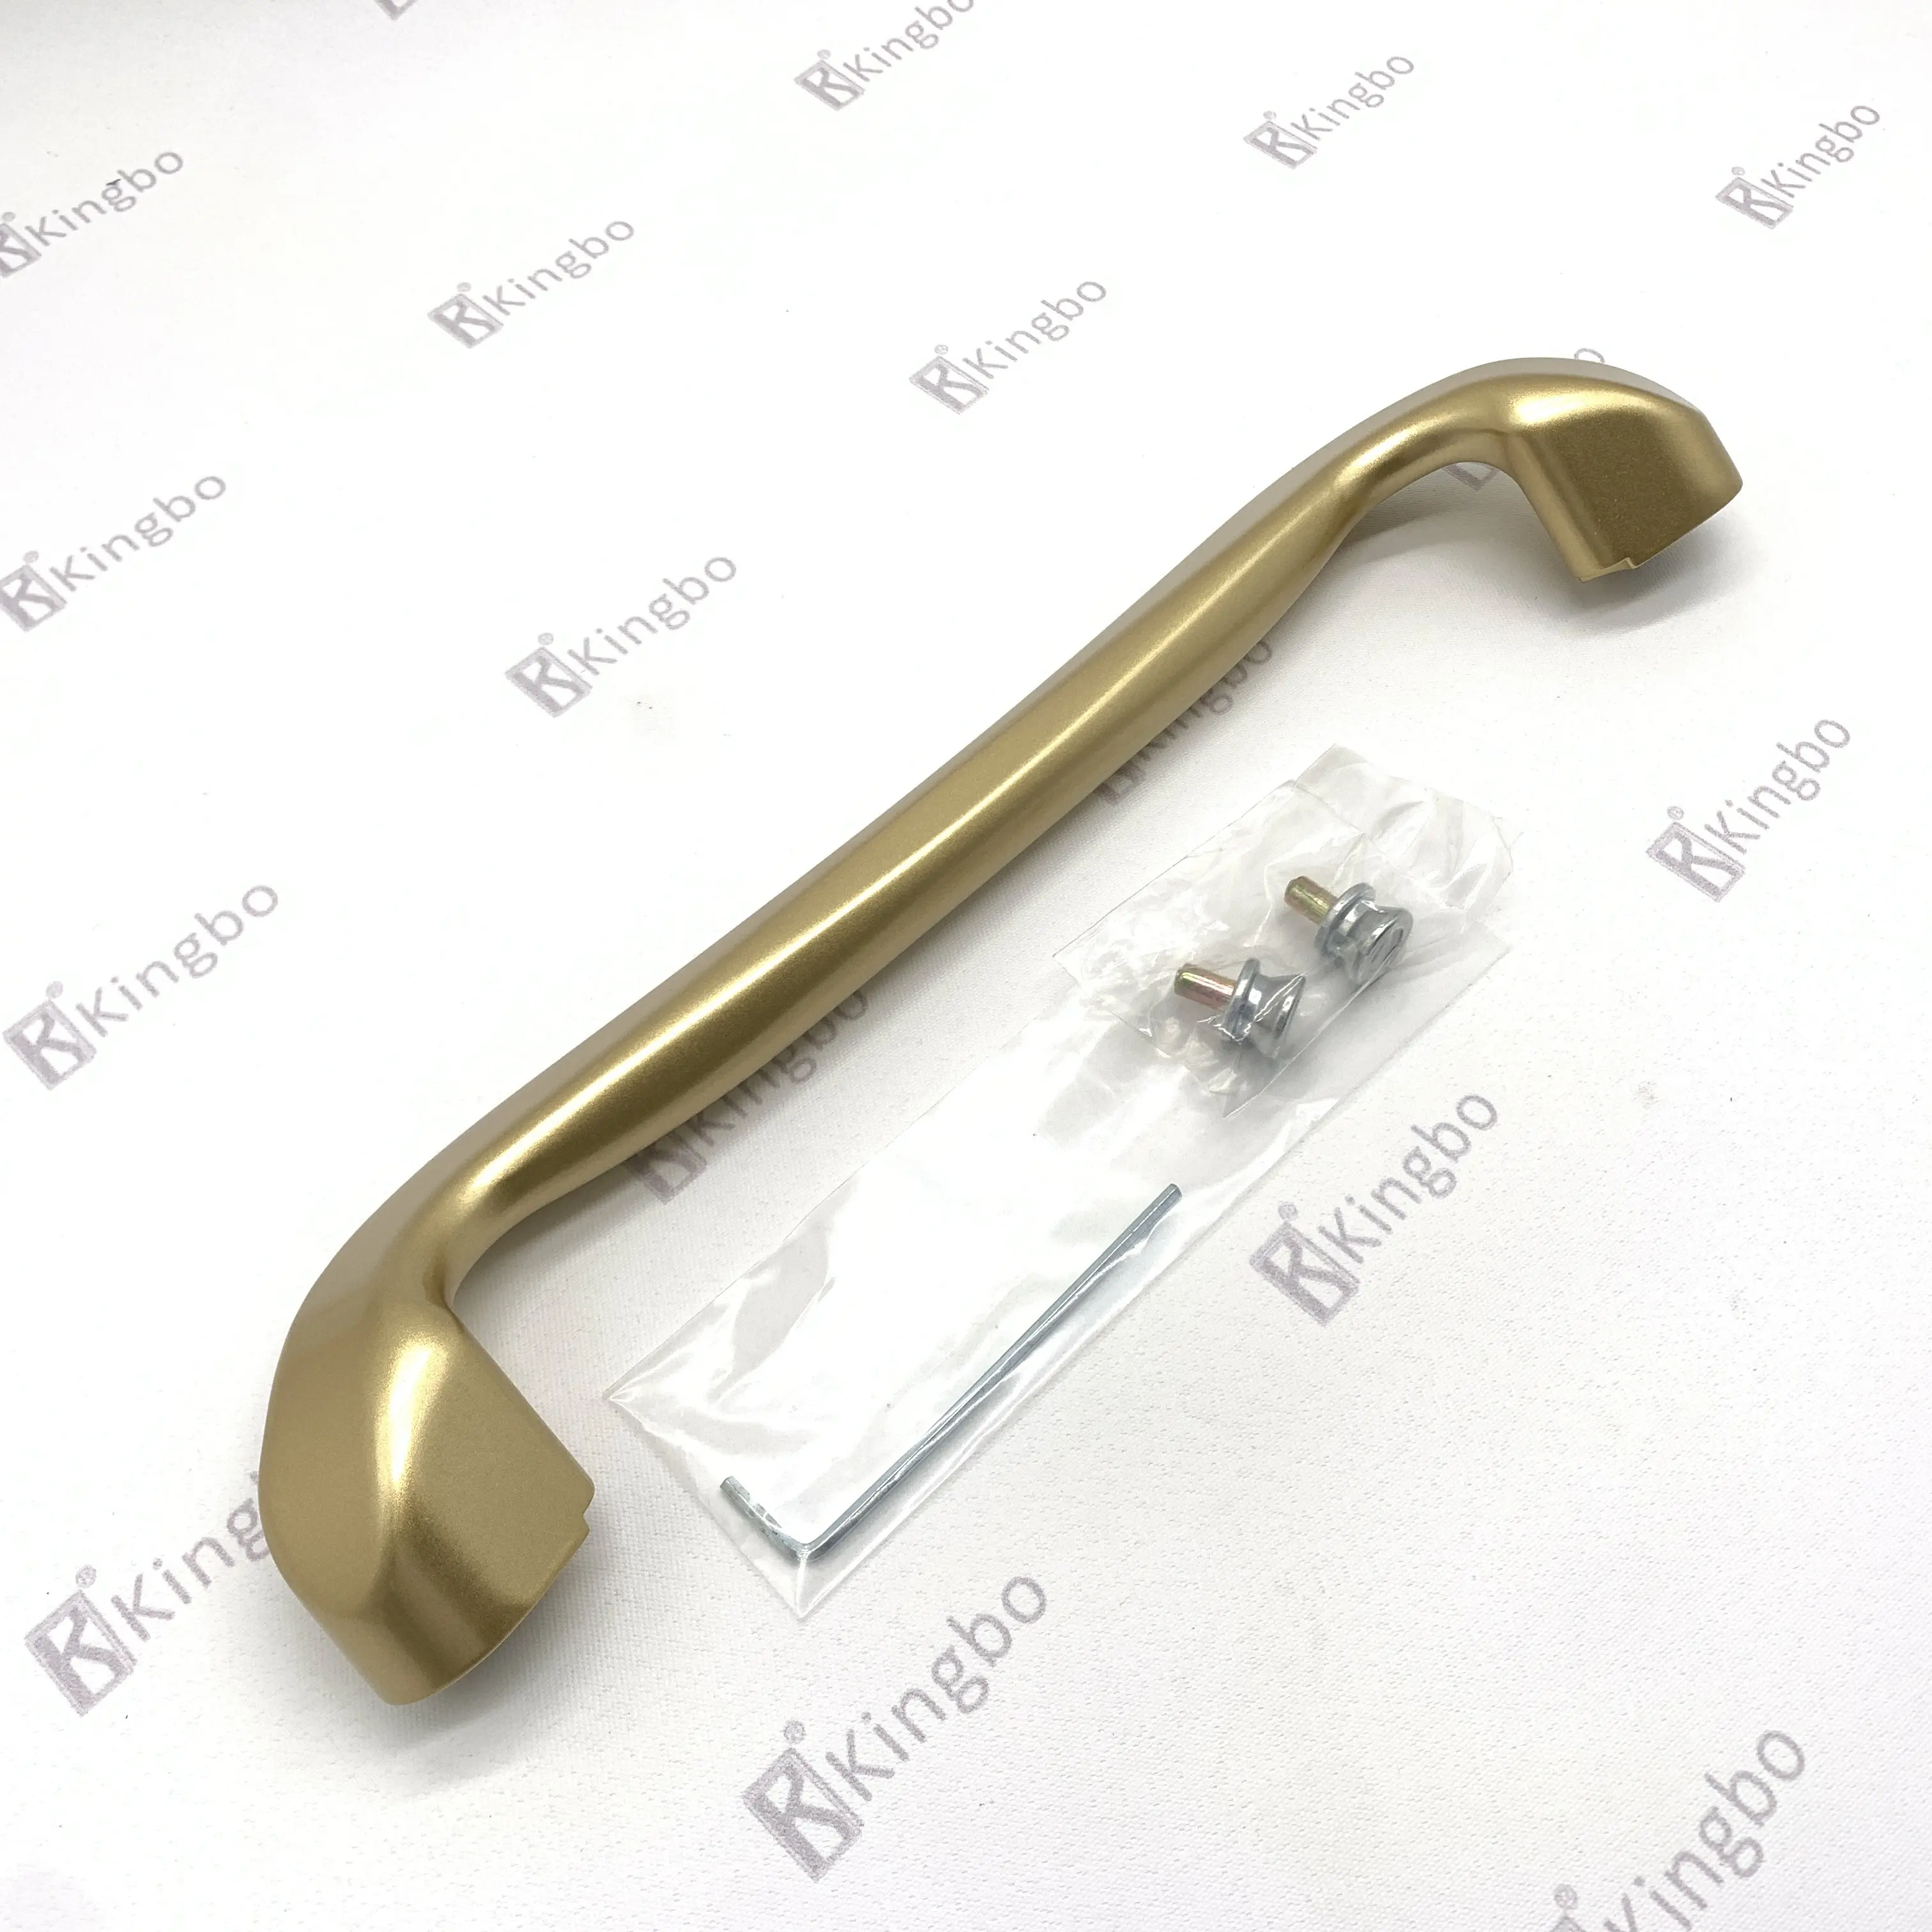 High Quality Luxury Golden Large Size Durable Handle High-end Sliding Door Zinc Alloy Big Pull Handle